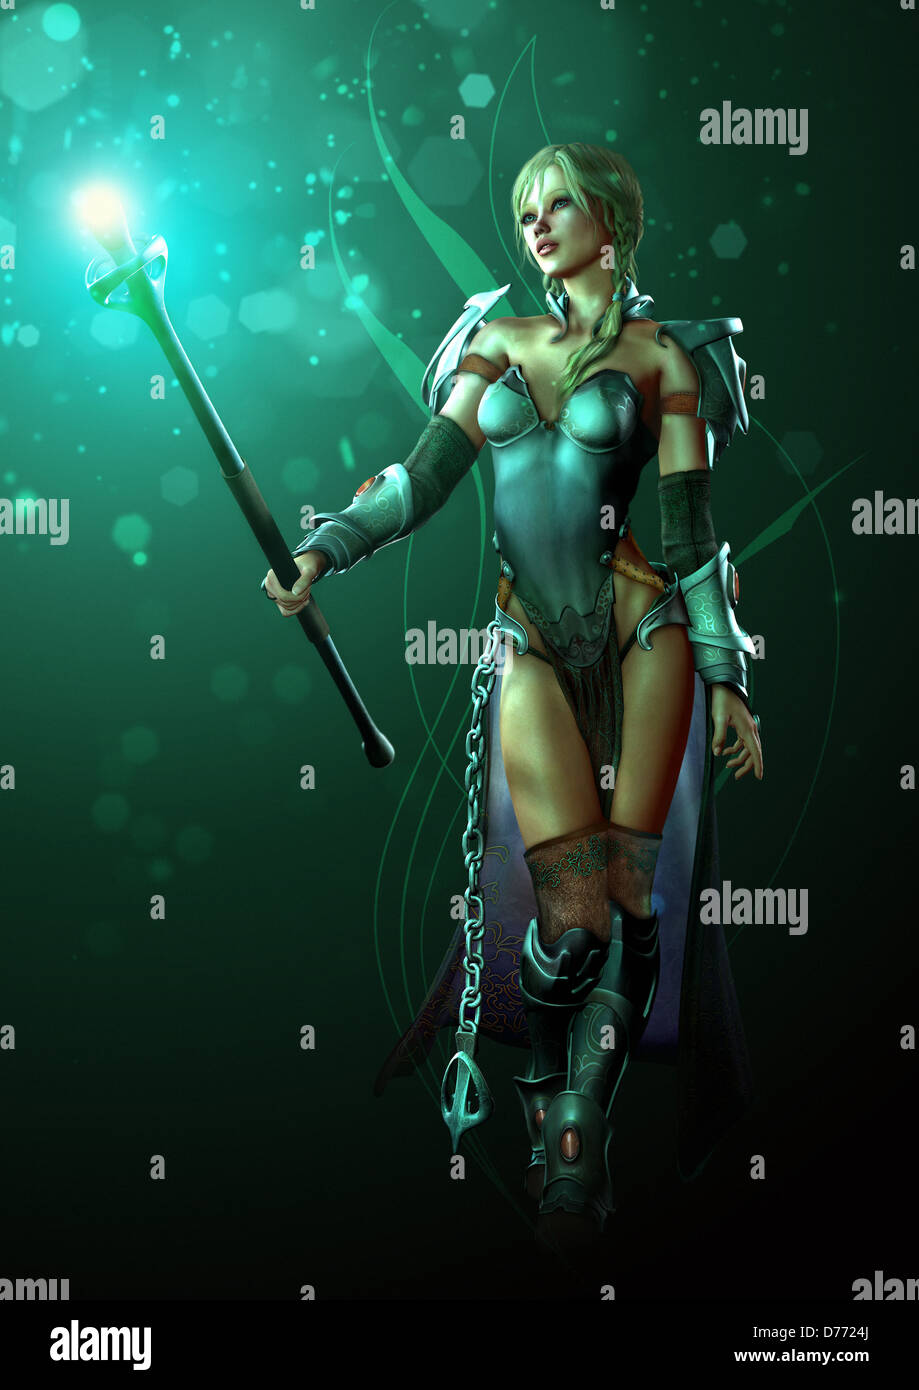 an illustration of a fantasy warrior maiden with luminous wand Stock Photo